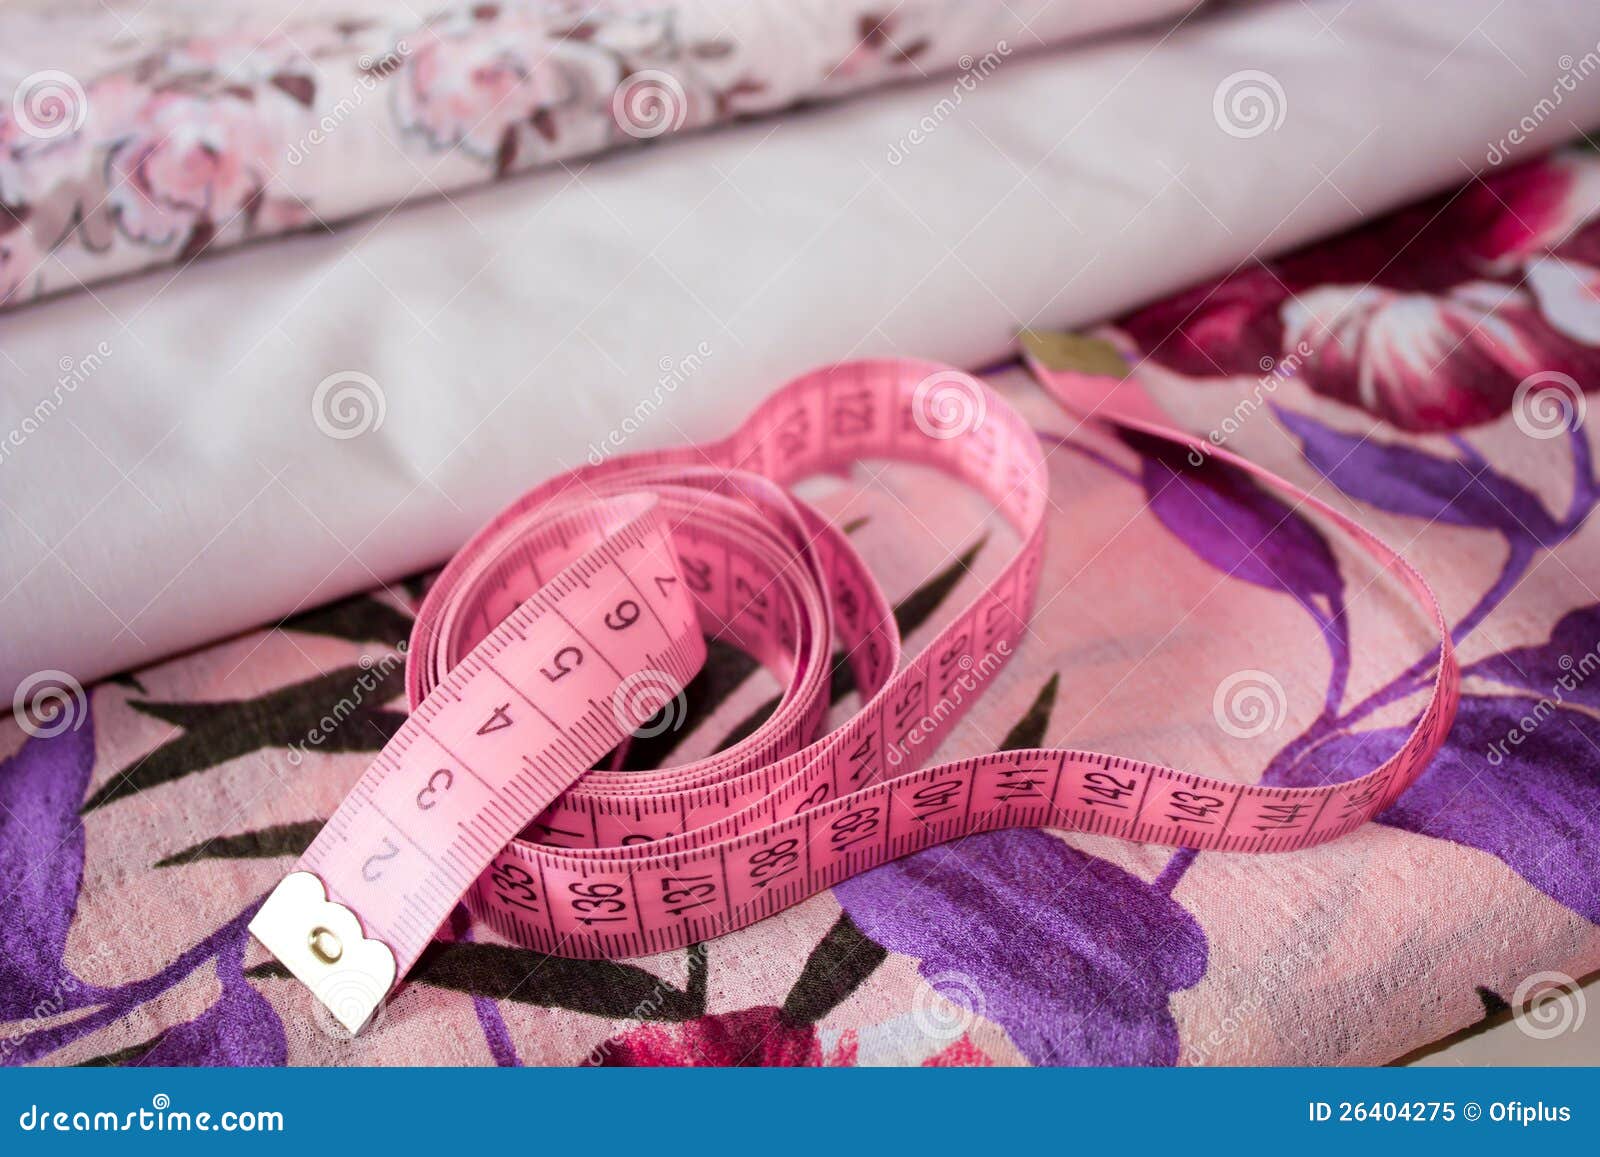 142+ Thousand Cloth Measure Royalty-Free Images, Stock Photos